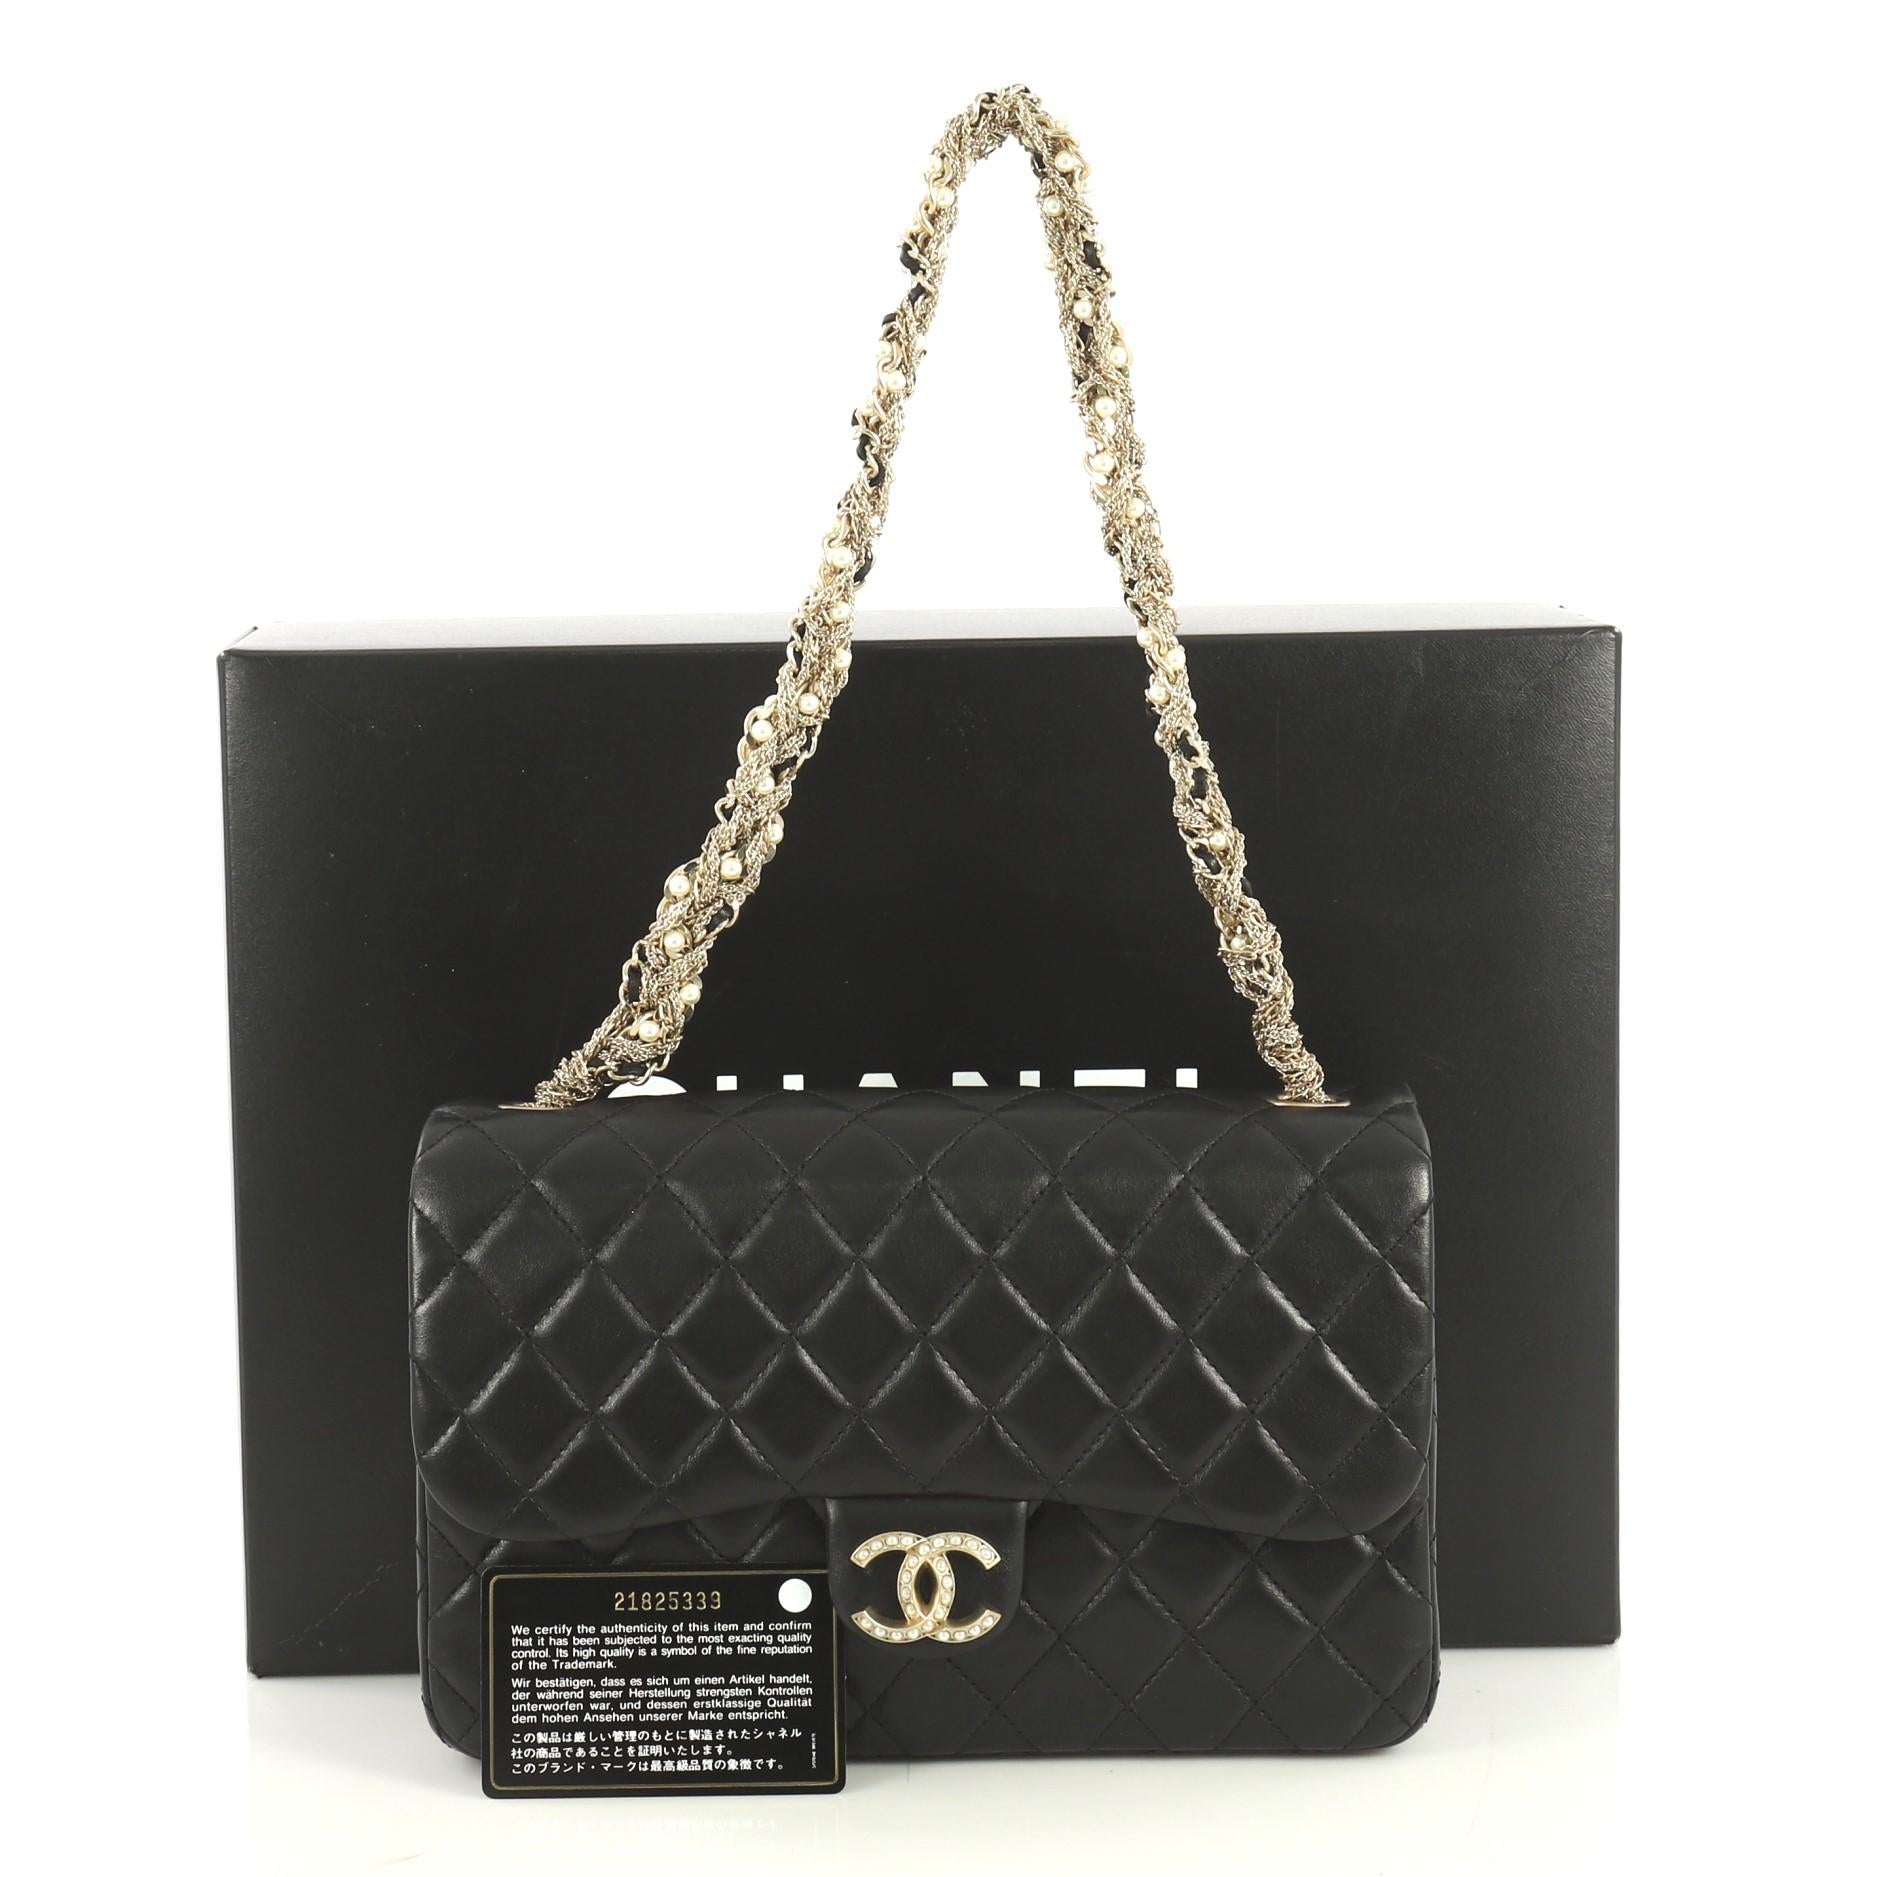 This Chanel Westminster Tangled Pearl Chain Flap Bag Quilted Lambskin Medium, crafted from black quilted lambskin leather, features twisted chain and pearl strap, pearl-studded CC logo and gold-tone hardware. Its magnetic snap button closure opens